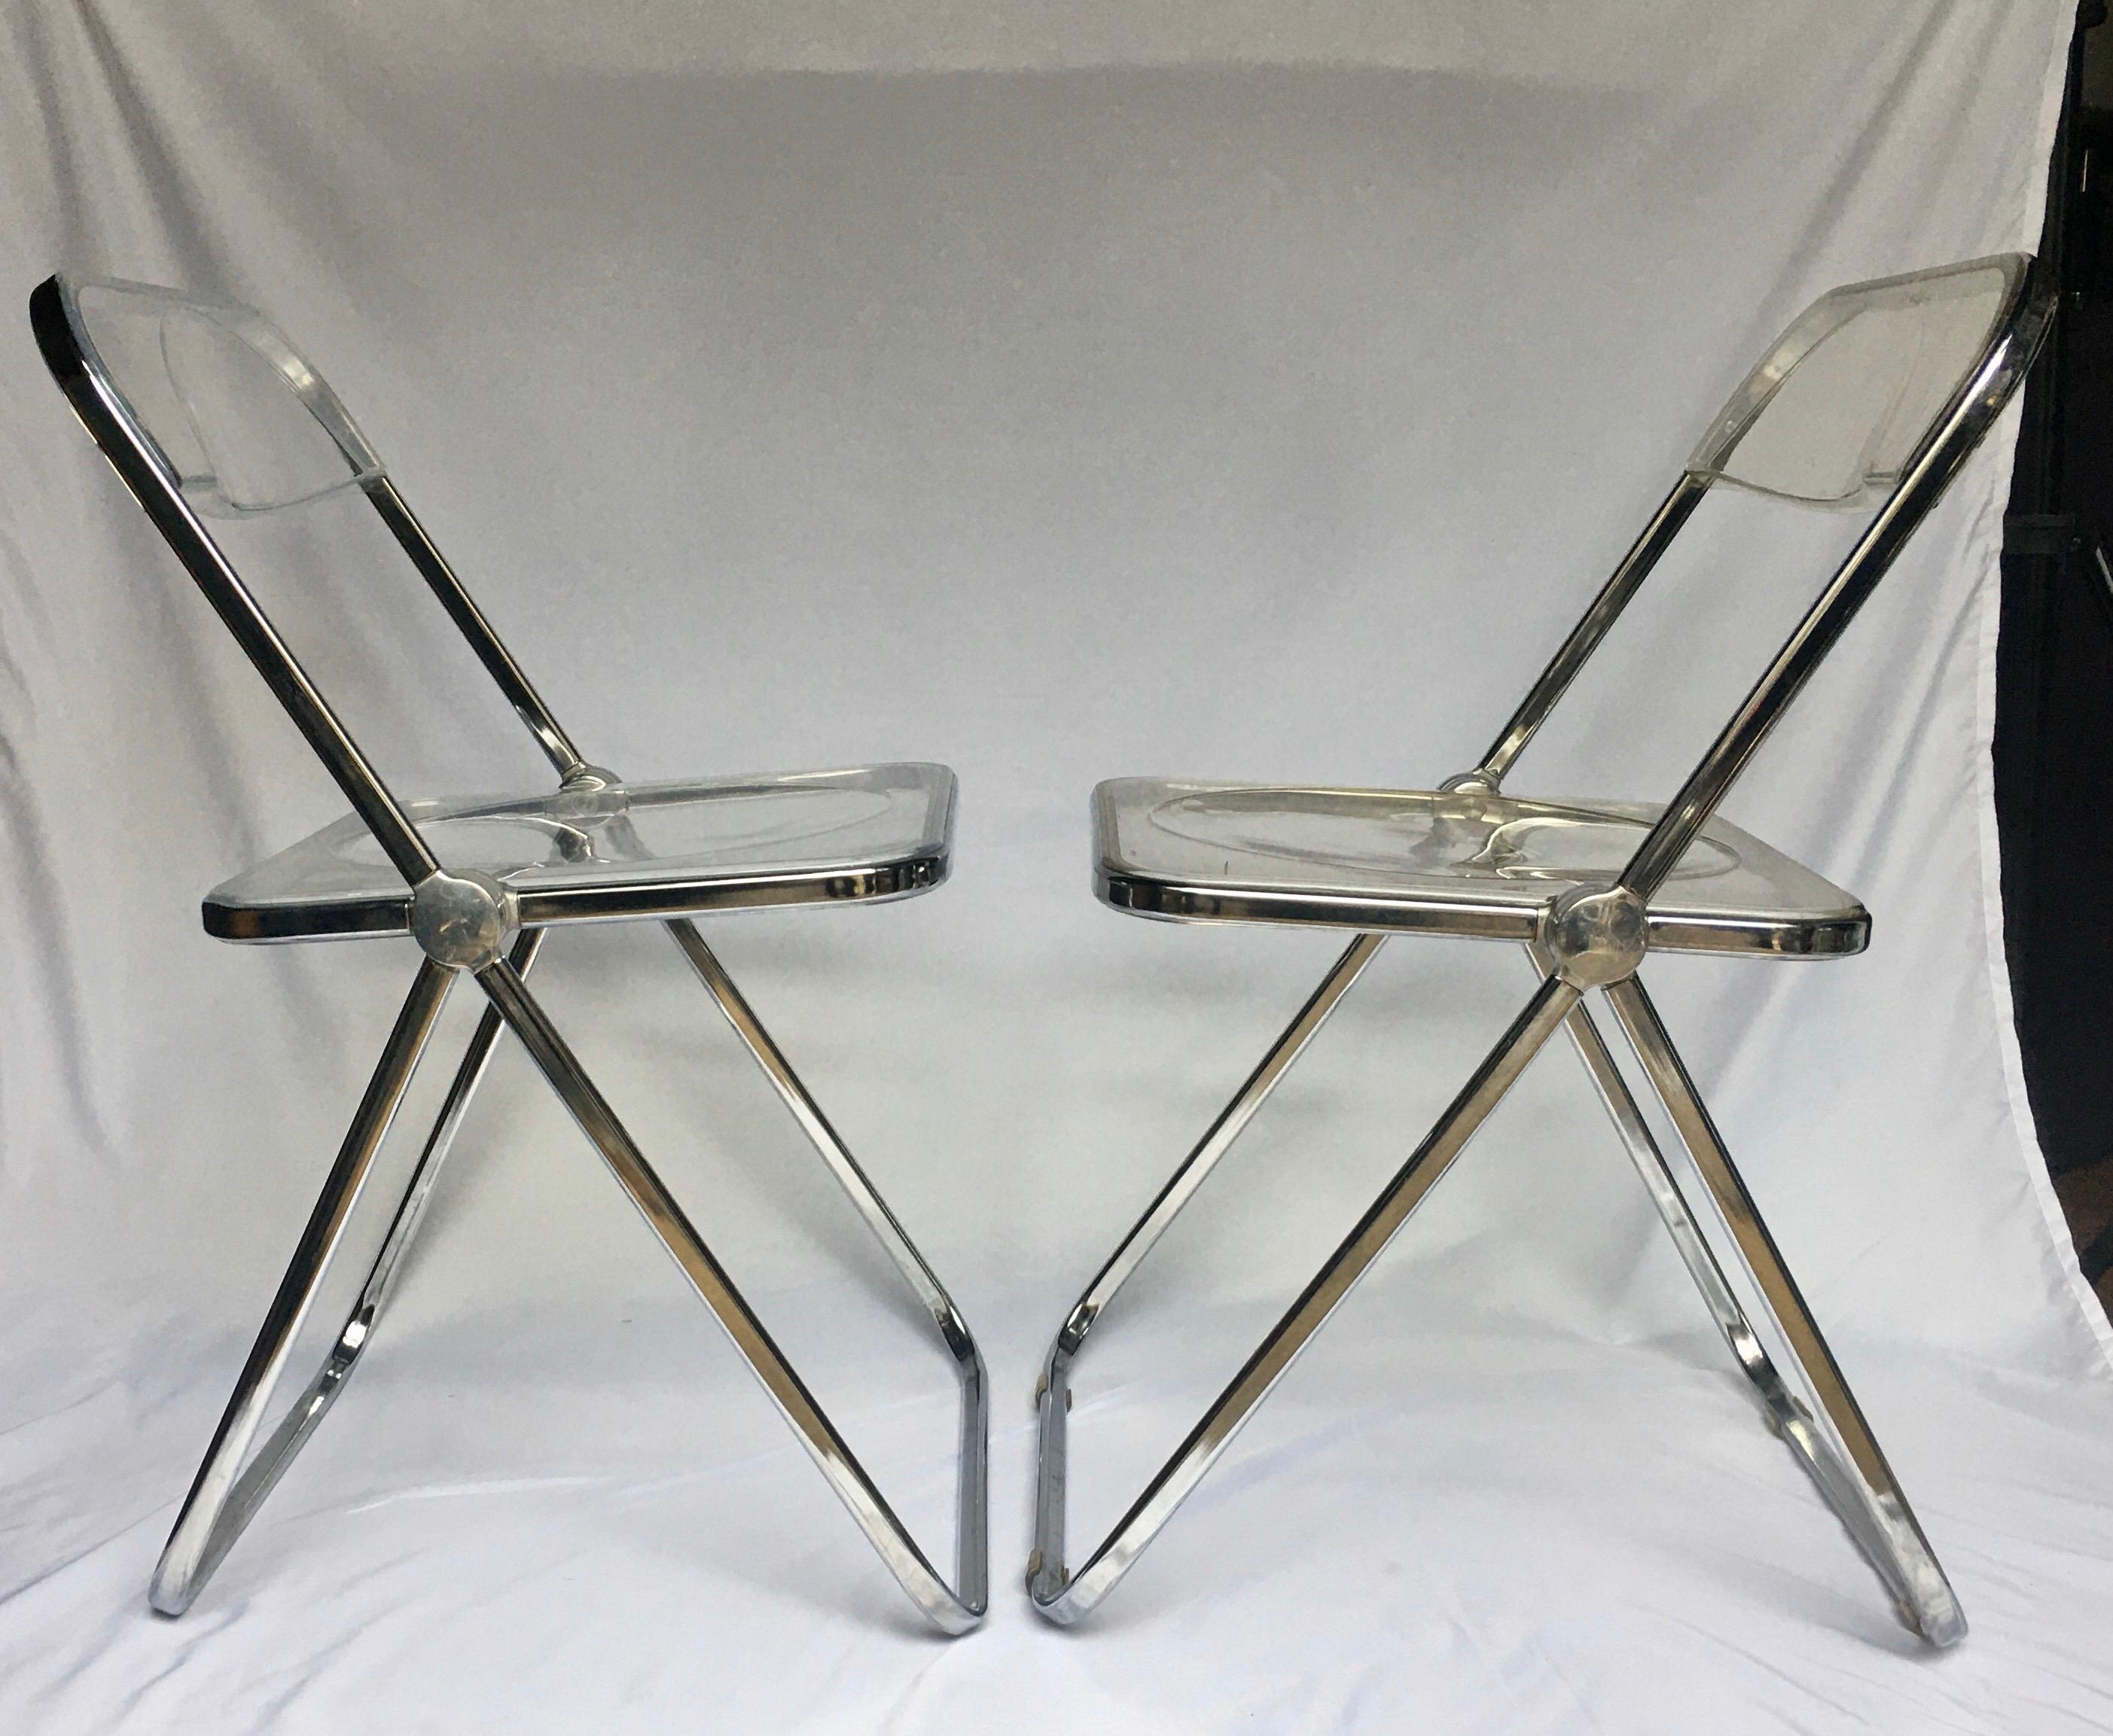 Original signed pair of Mid-Century Modern slim 'Plia' folding chairs by Giancarlo Piretti. These Italian designed dining chairs feature chrome-plated steel-tube frames with clear Lucite acrylic seats and backs. The unique folding mechanisms make it